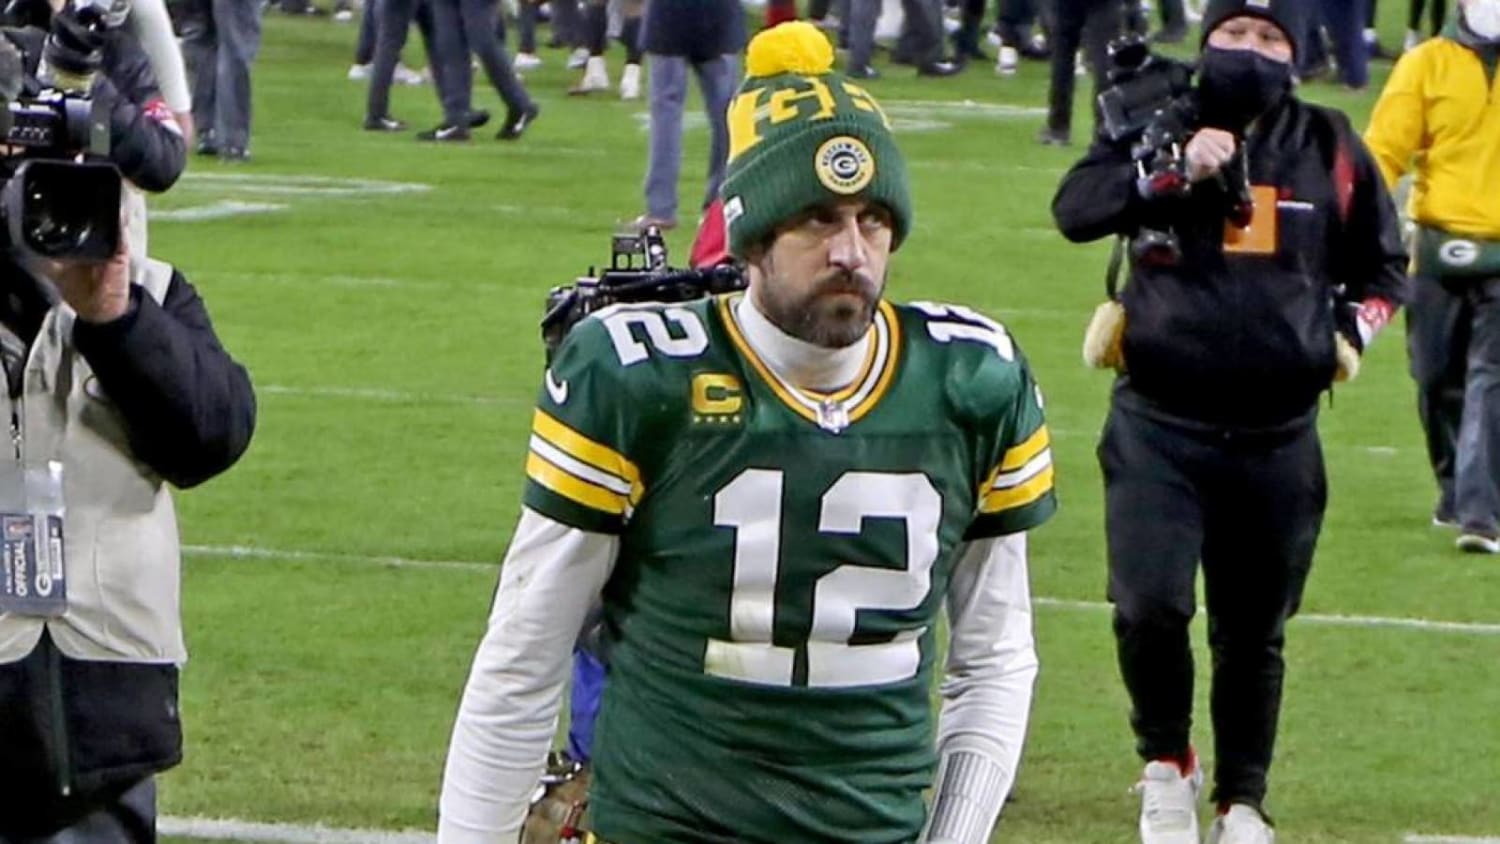 Standoff between Aaron Rodgers, Packers to last through start of training camp?